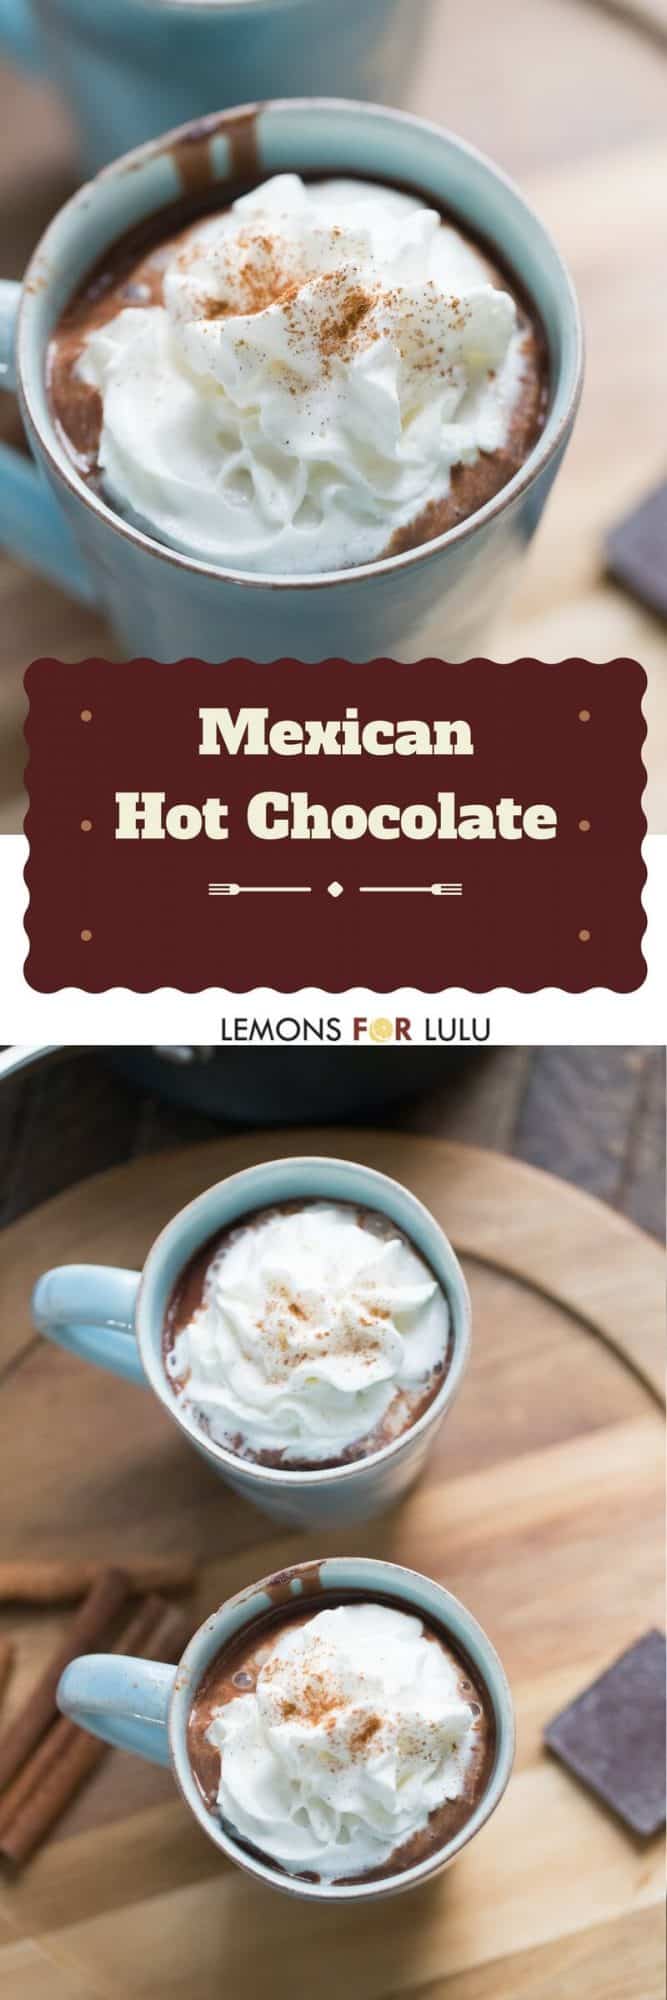 How do you take your hot chocolate? I take mine sweet and spicy like this Mexican hot chocolate recipe! It is the BEST!